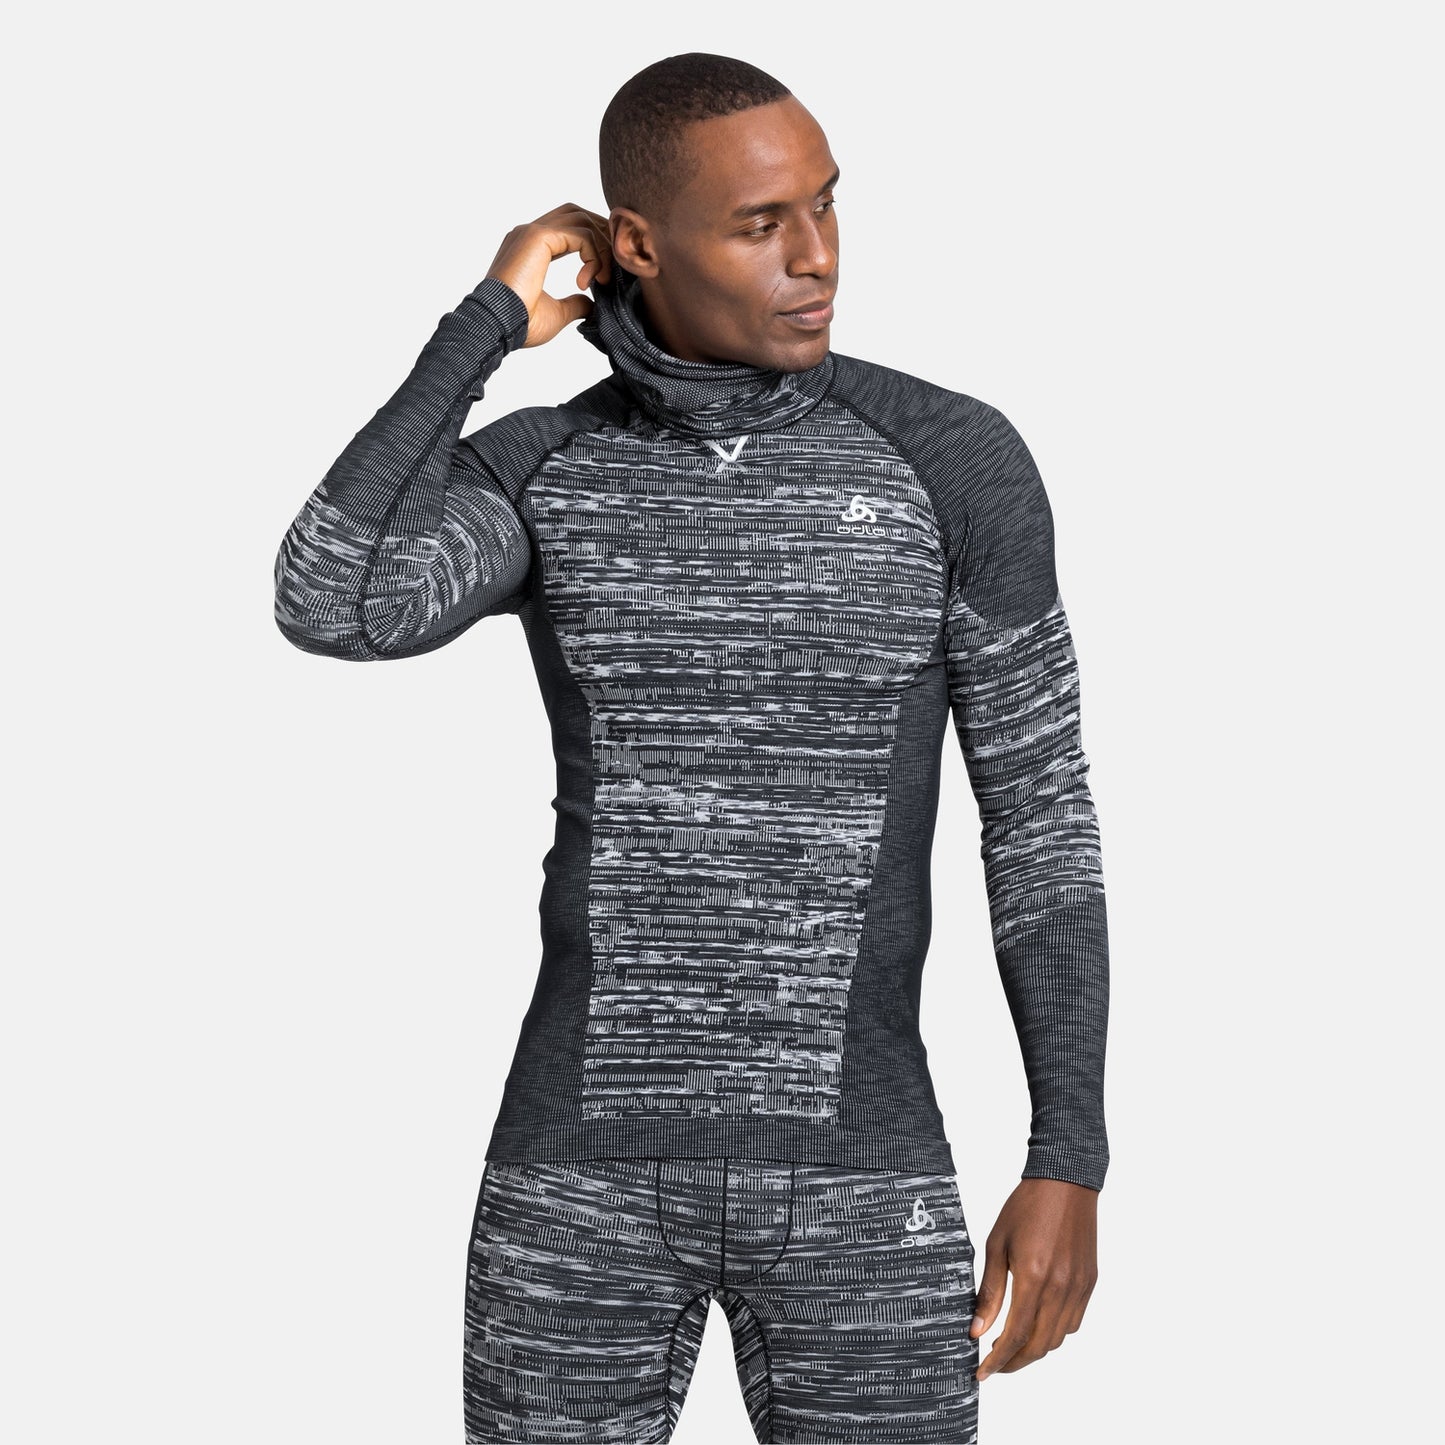 Odlo Men`s The Blackcomb ECO long sleeve base layer top with facemask - Black Space Dye